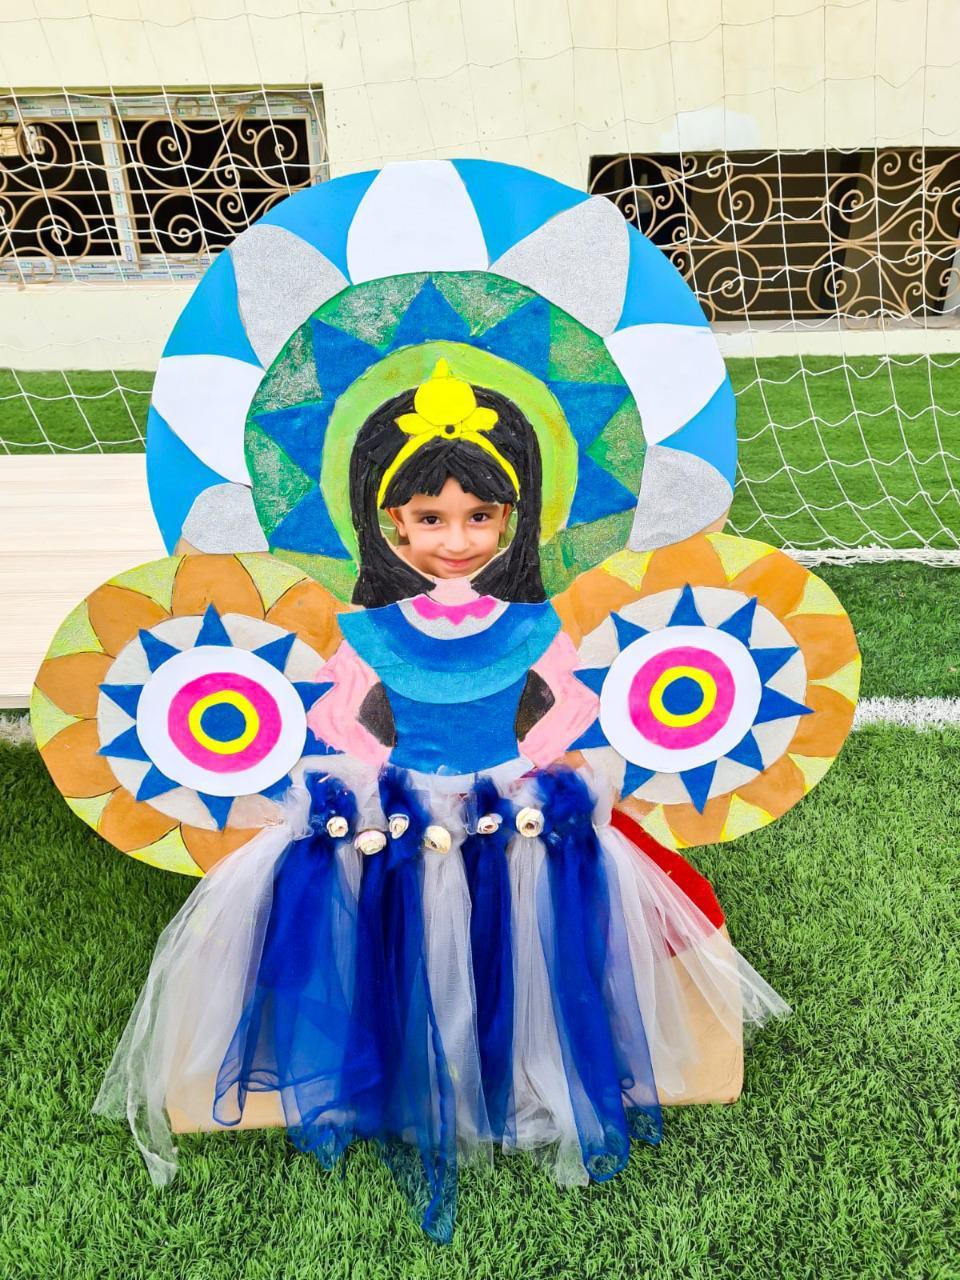 A child in a colorful and imaginative costume at IVY STEM International School, showcasing creativity and outdoor activities.